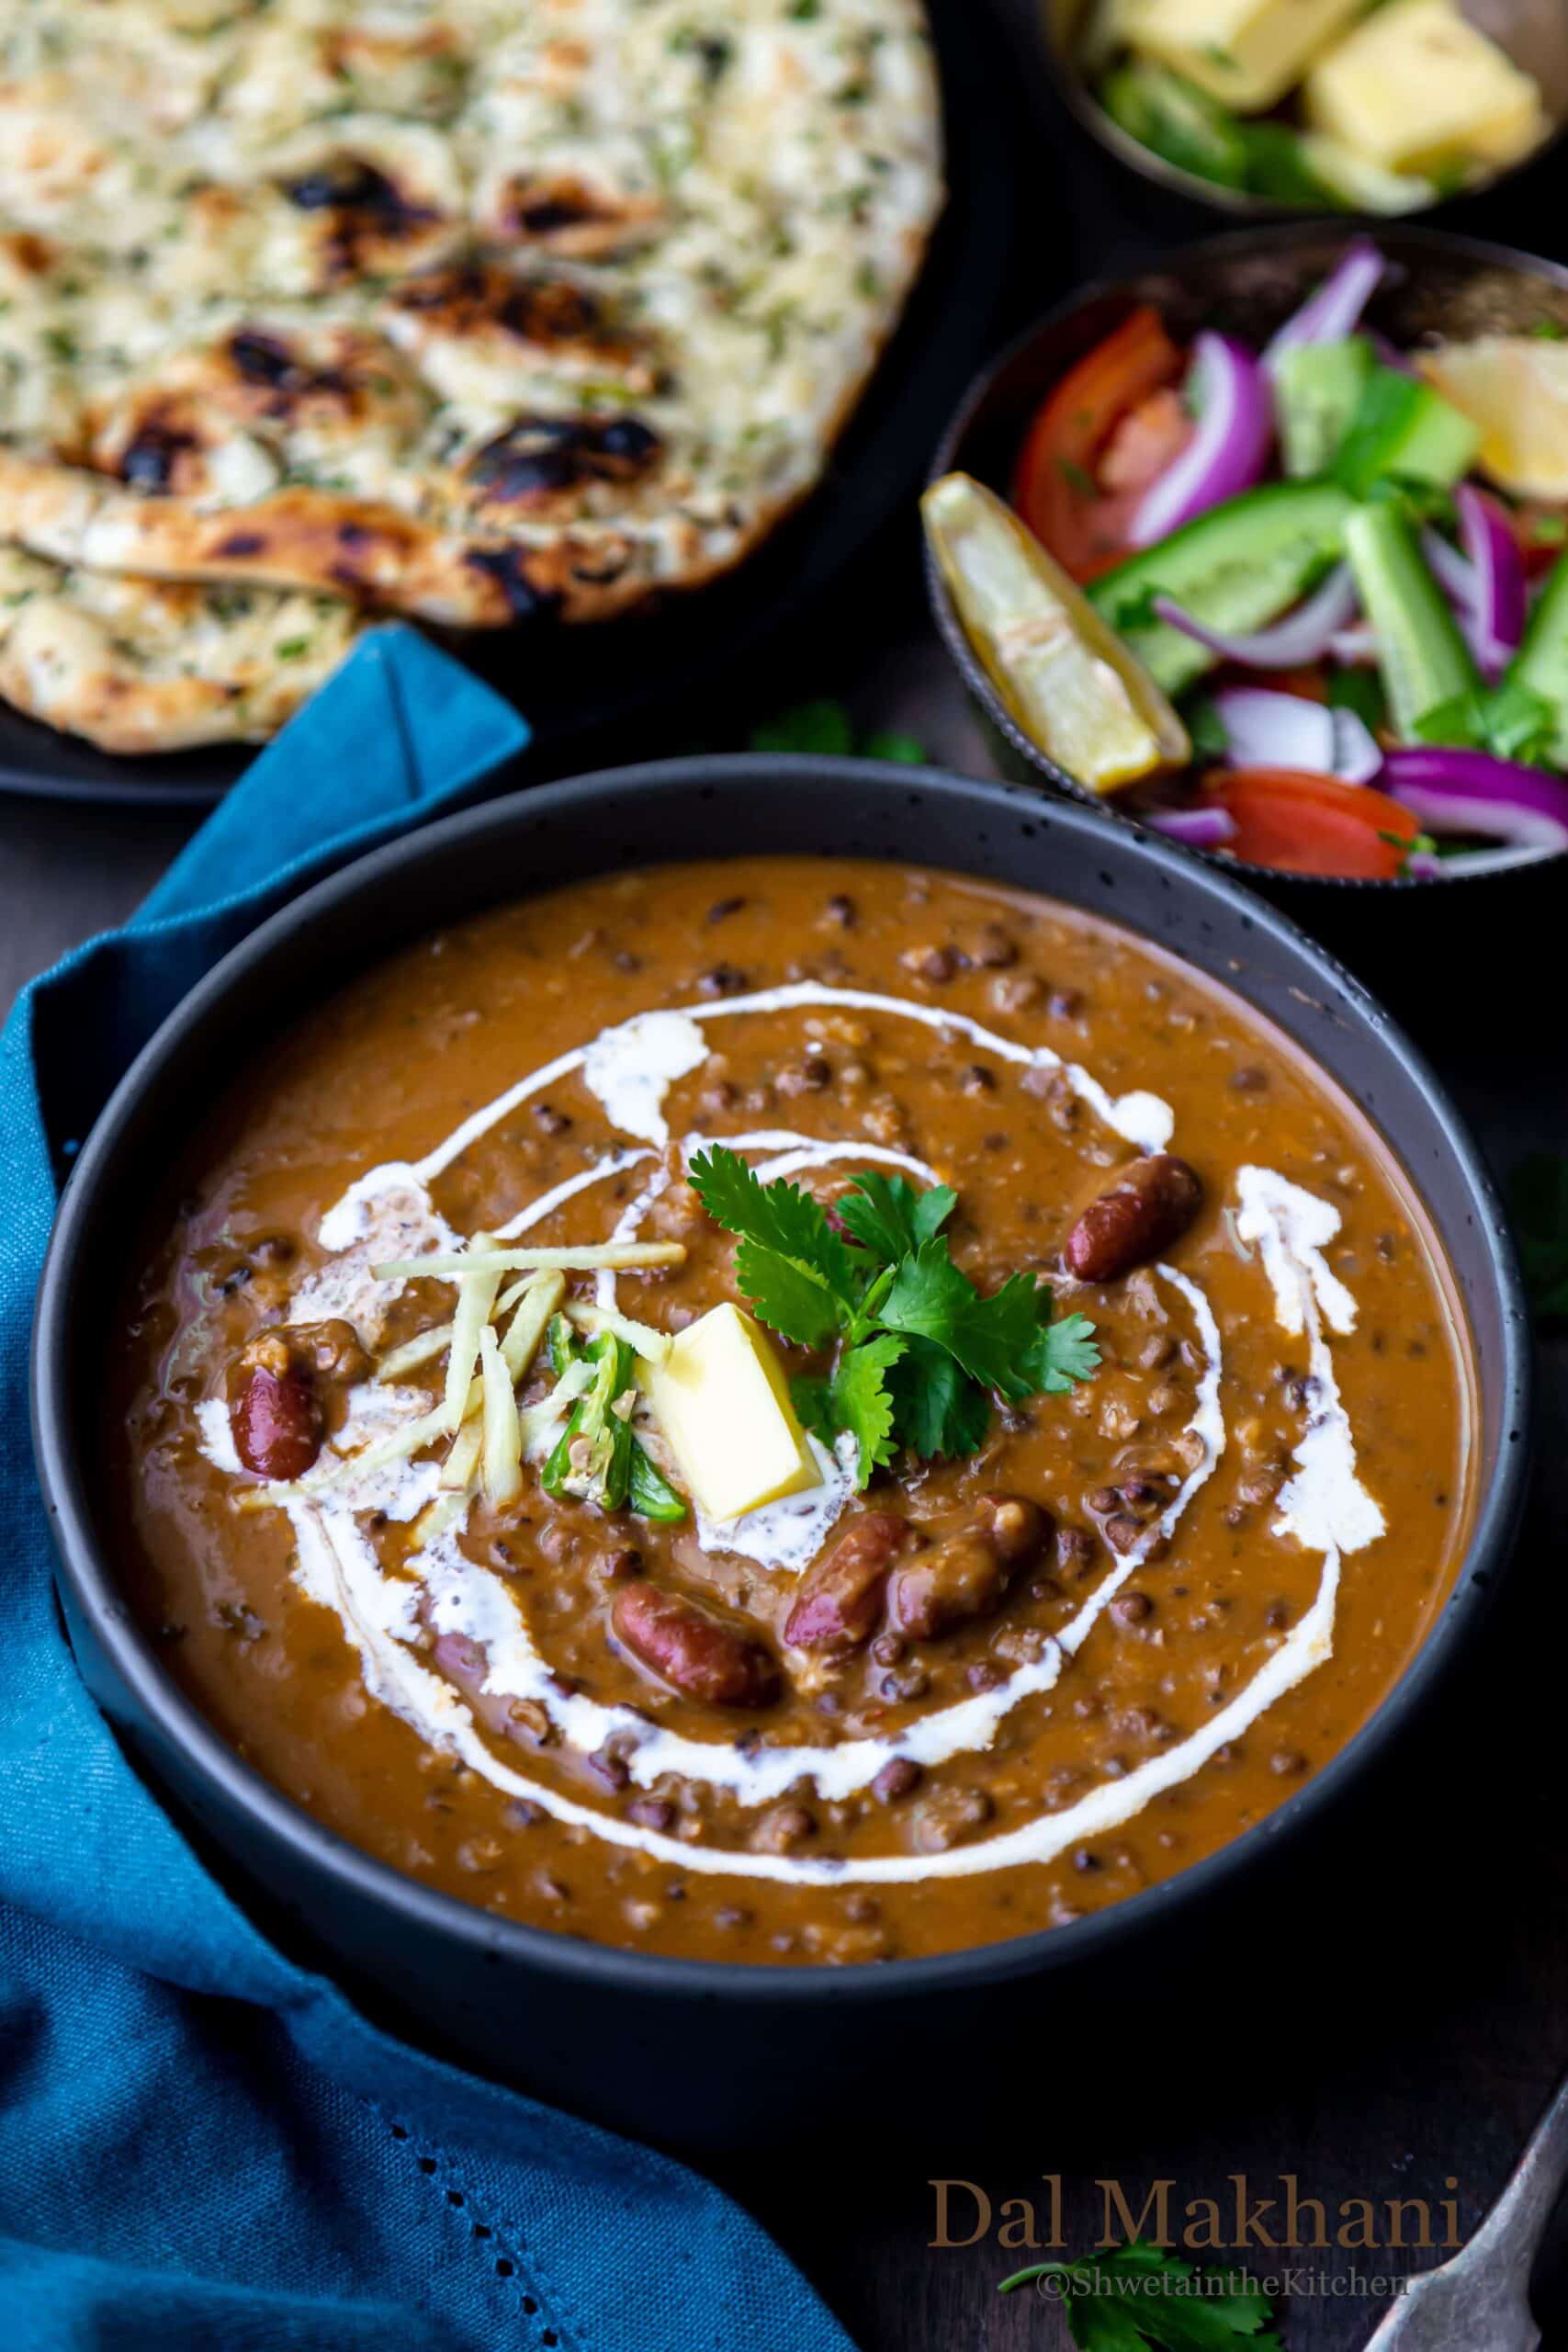 Dal Makhani in a black bowl with salad and naan on side